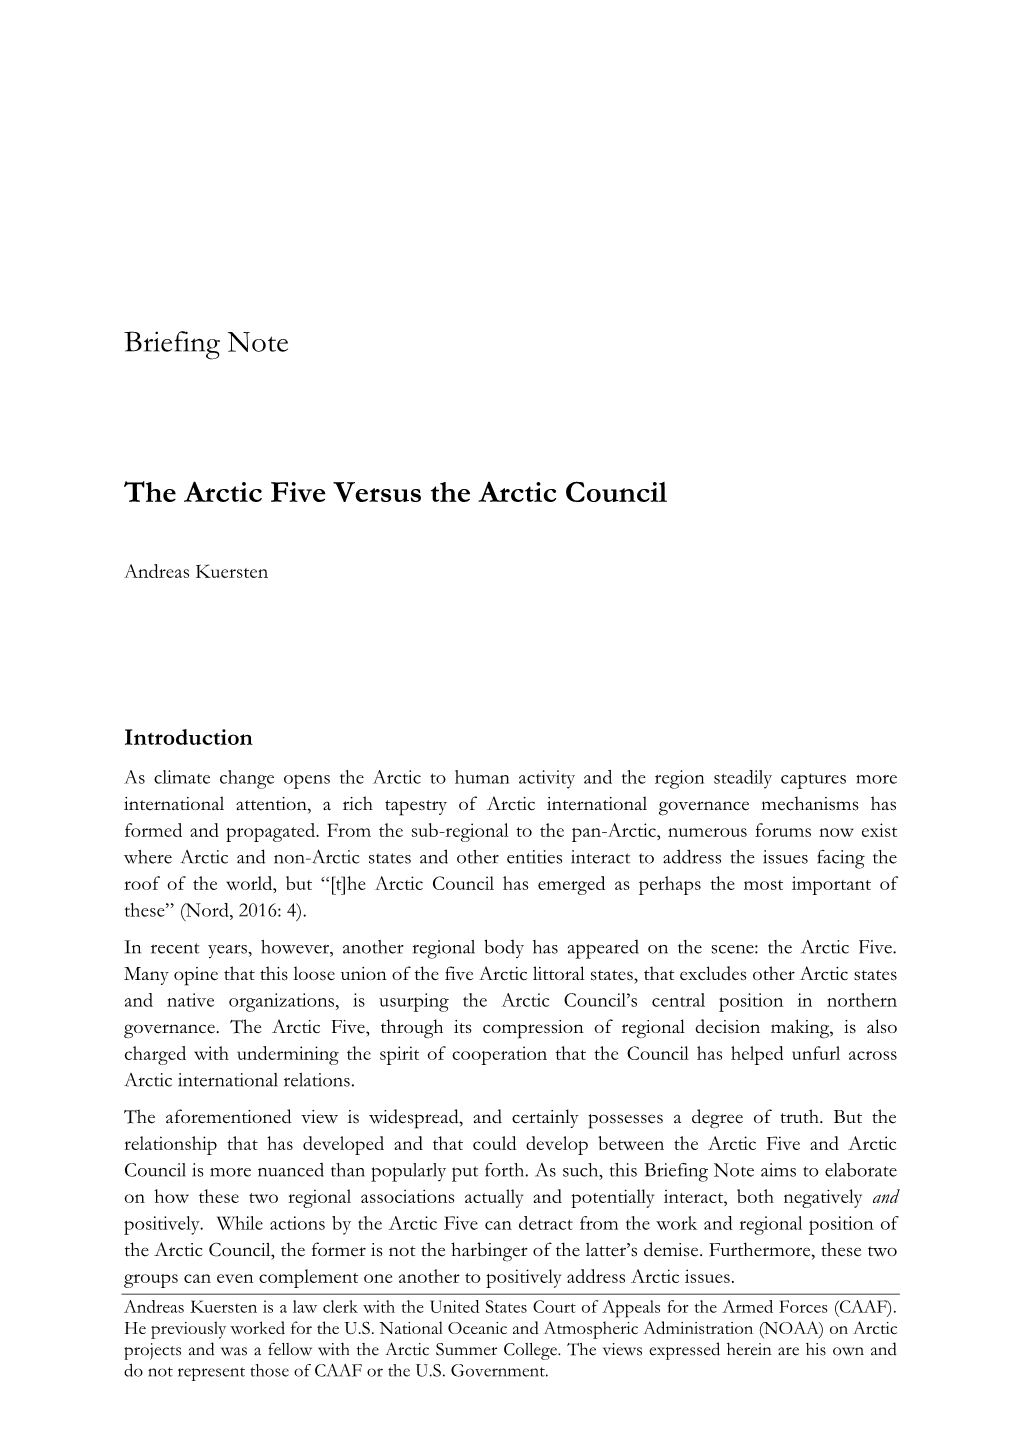 Briefing Note the Arctic Five Versus the Arctic Council